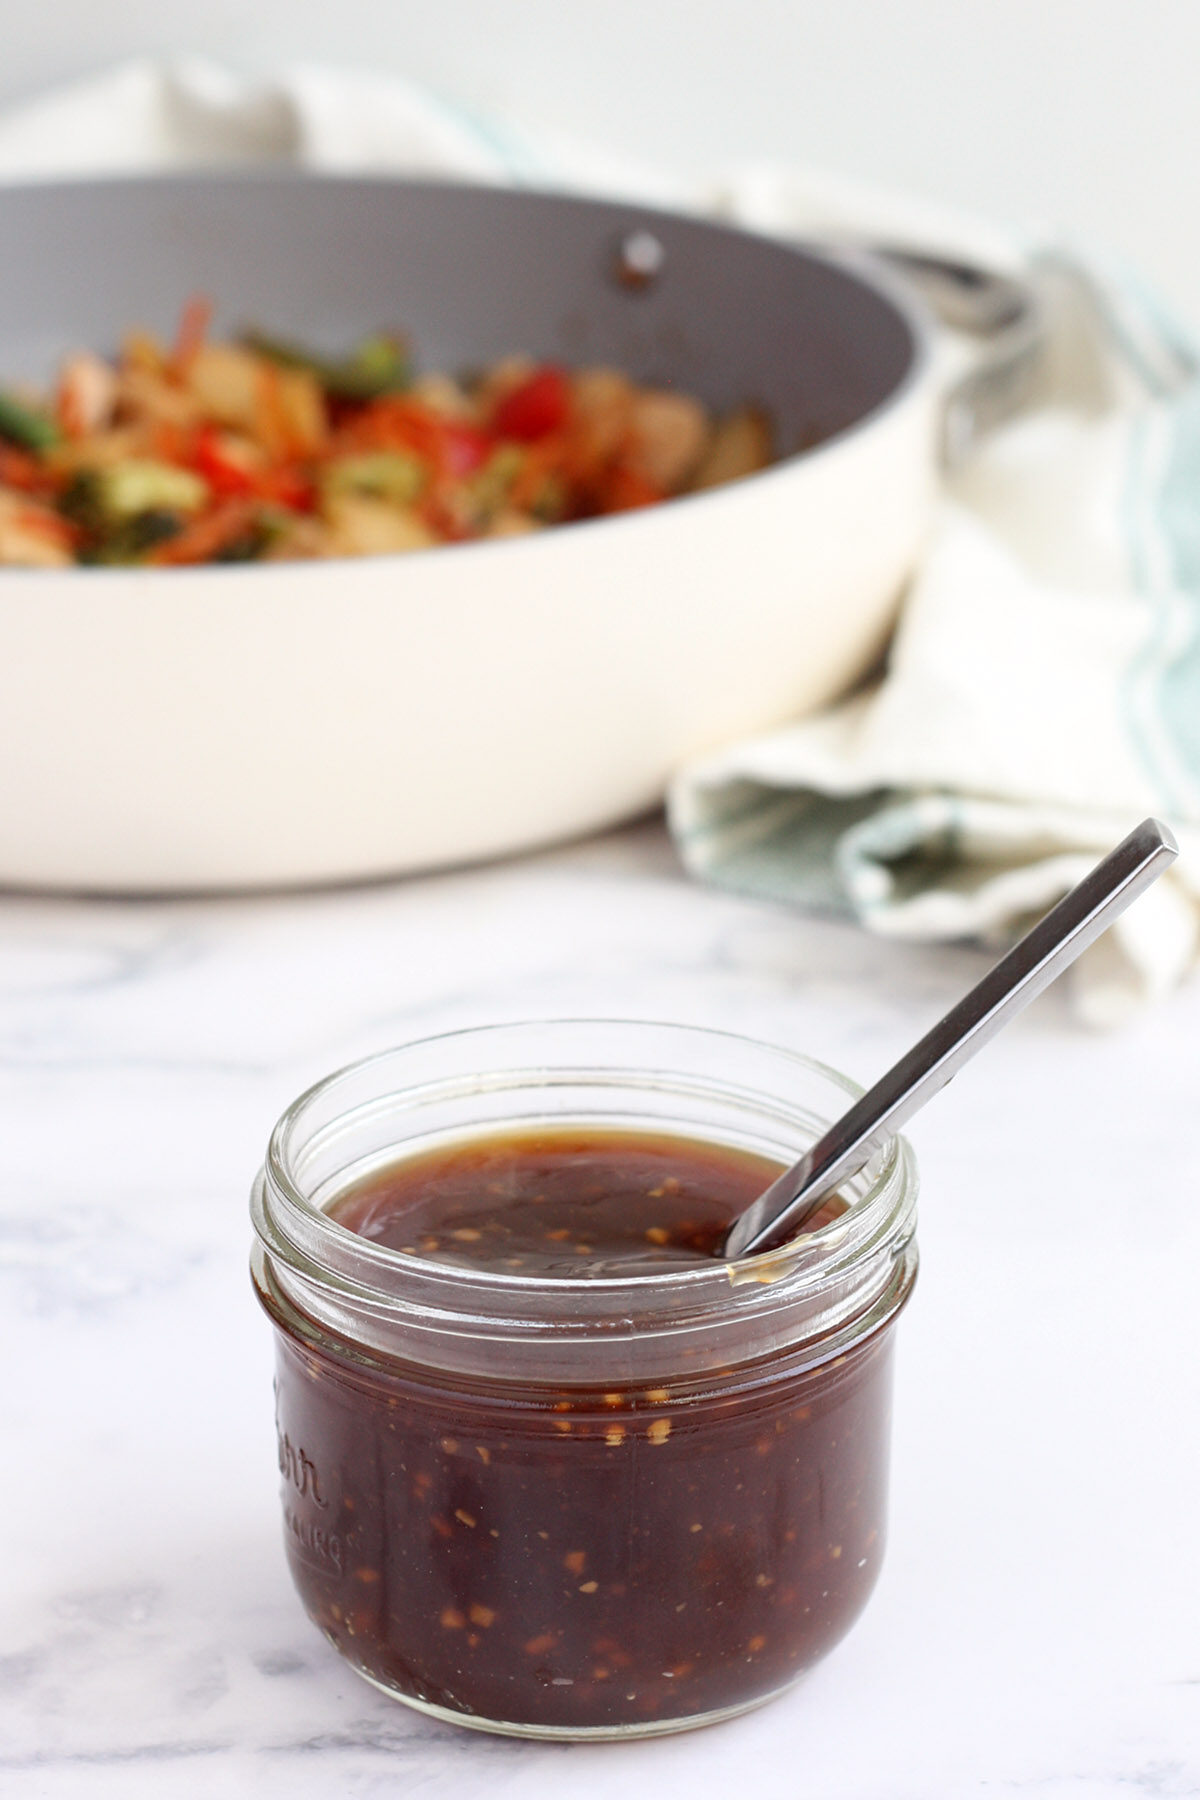 A jar of homemade stir fry sauce with a spoon in front of a fry pan